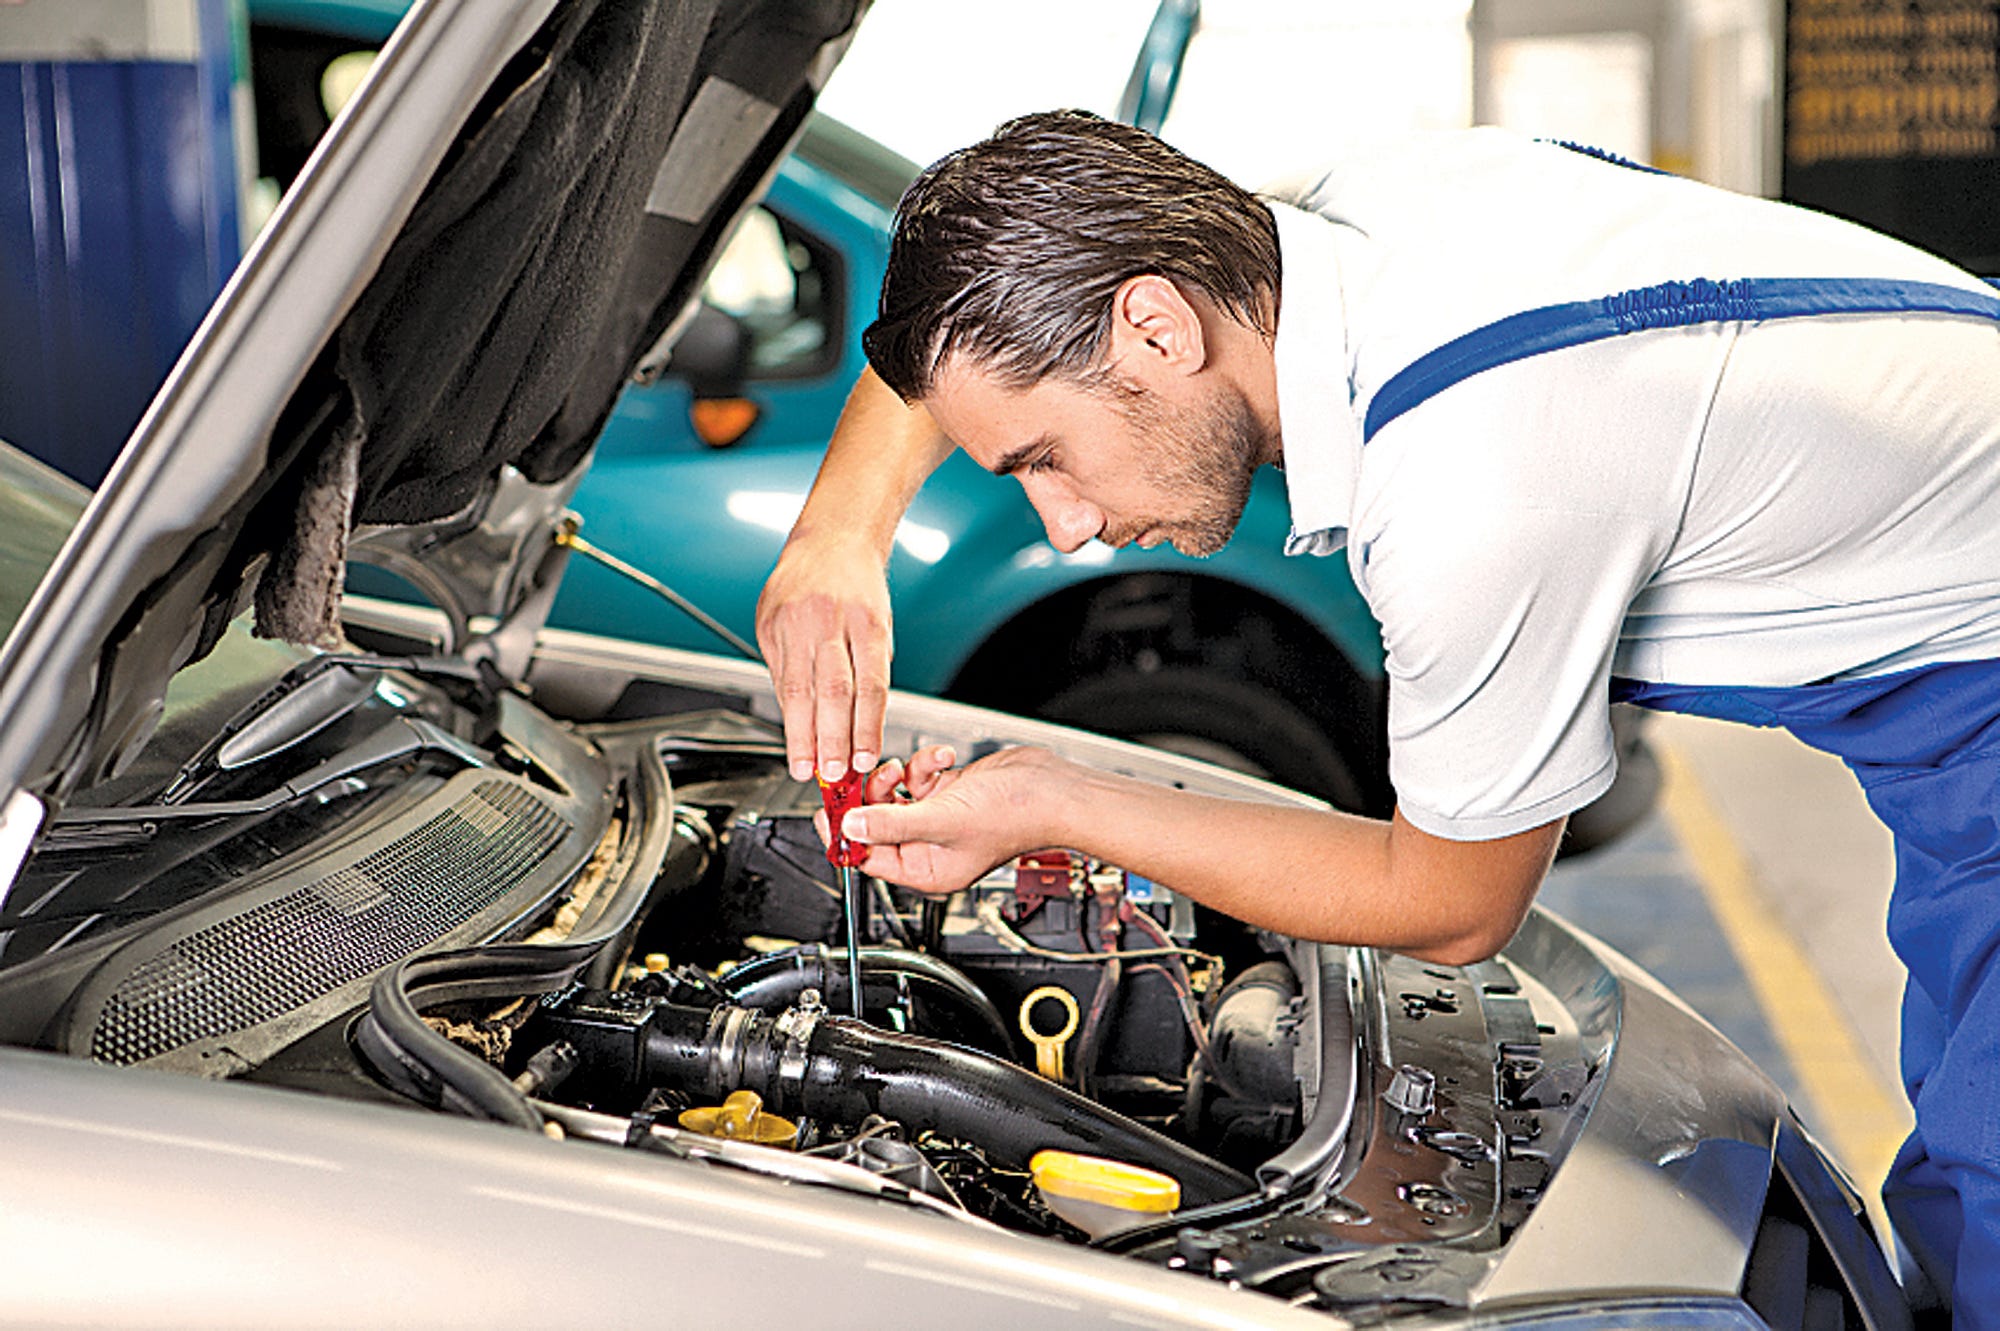 What are the Characteristics of a Good Auto Repair Mechanic? - 1*JktzC9GrA L4yz0cCy8a5Q